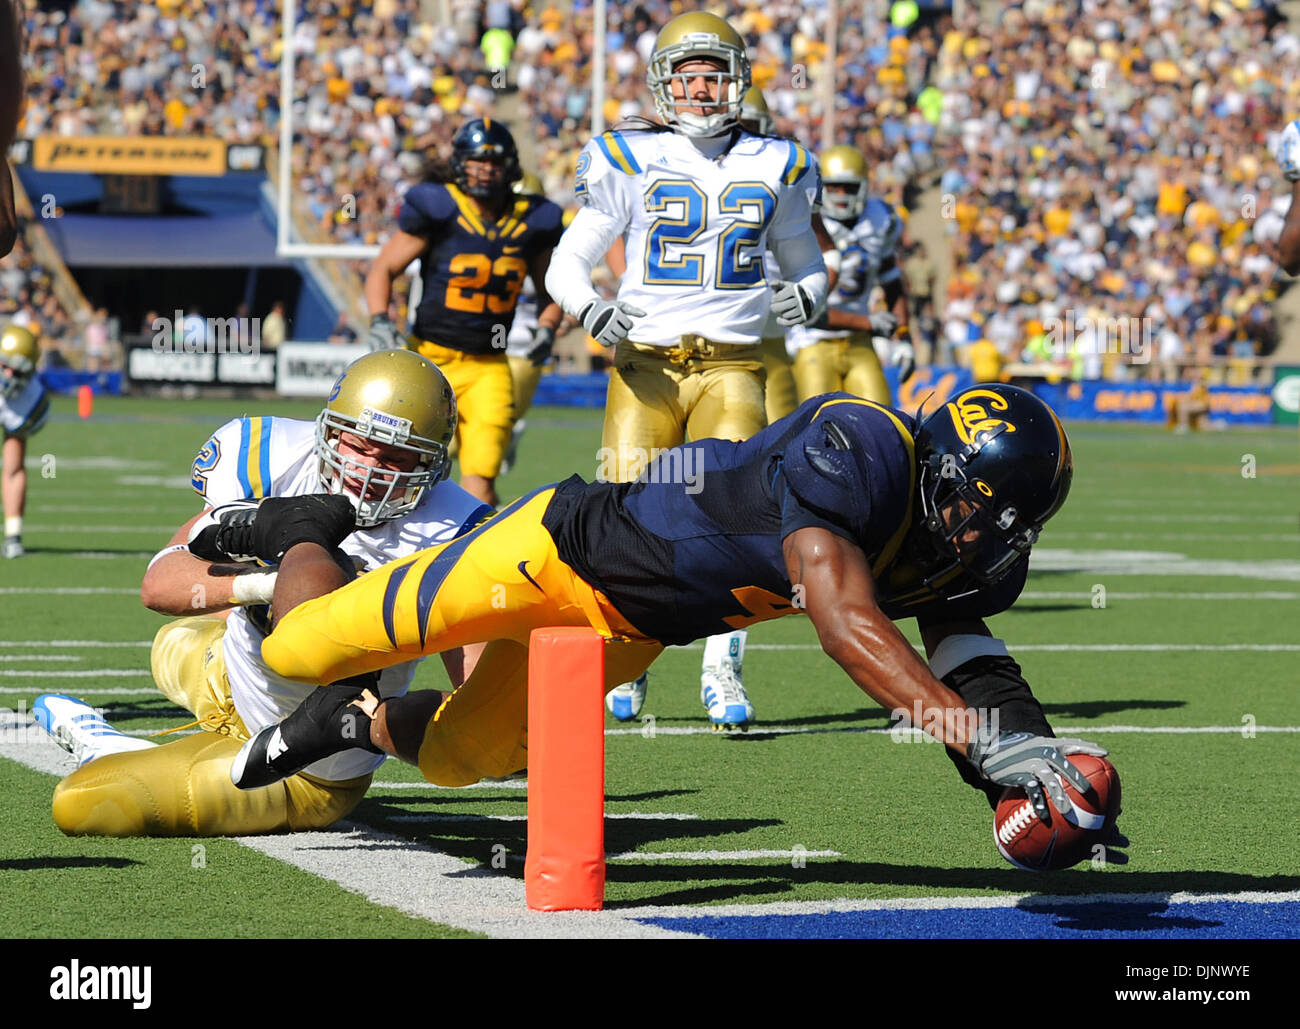 California Golden Bears Jhavid Best, #4, dives into the endzone to score a touchdown while being tackled by UCLA Bruins Joh Hale, #12, in the 2nd quarter of their game on Saturday, October 25, 2008 at Memorial Stadium in Berkeley, Calif. (Jose Carlos Fajardo/Contra Costa Times/ZUMA Press). Stock Photo